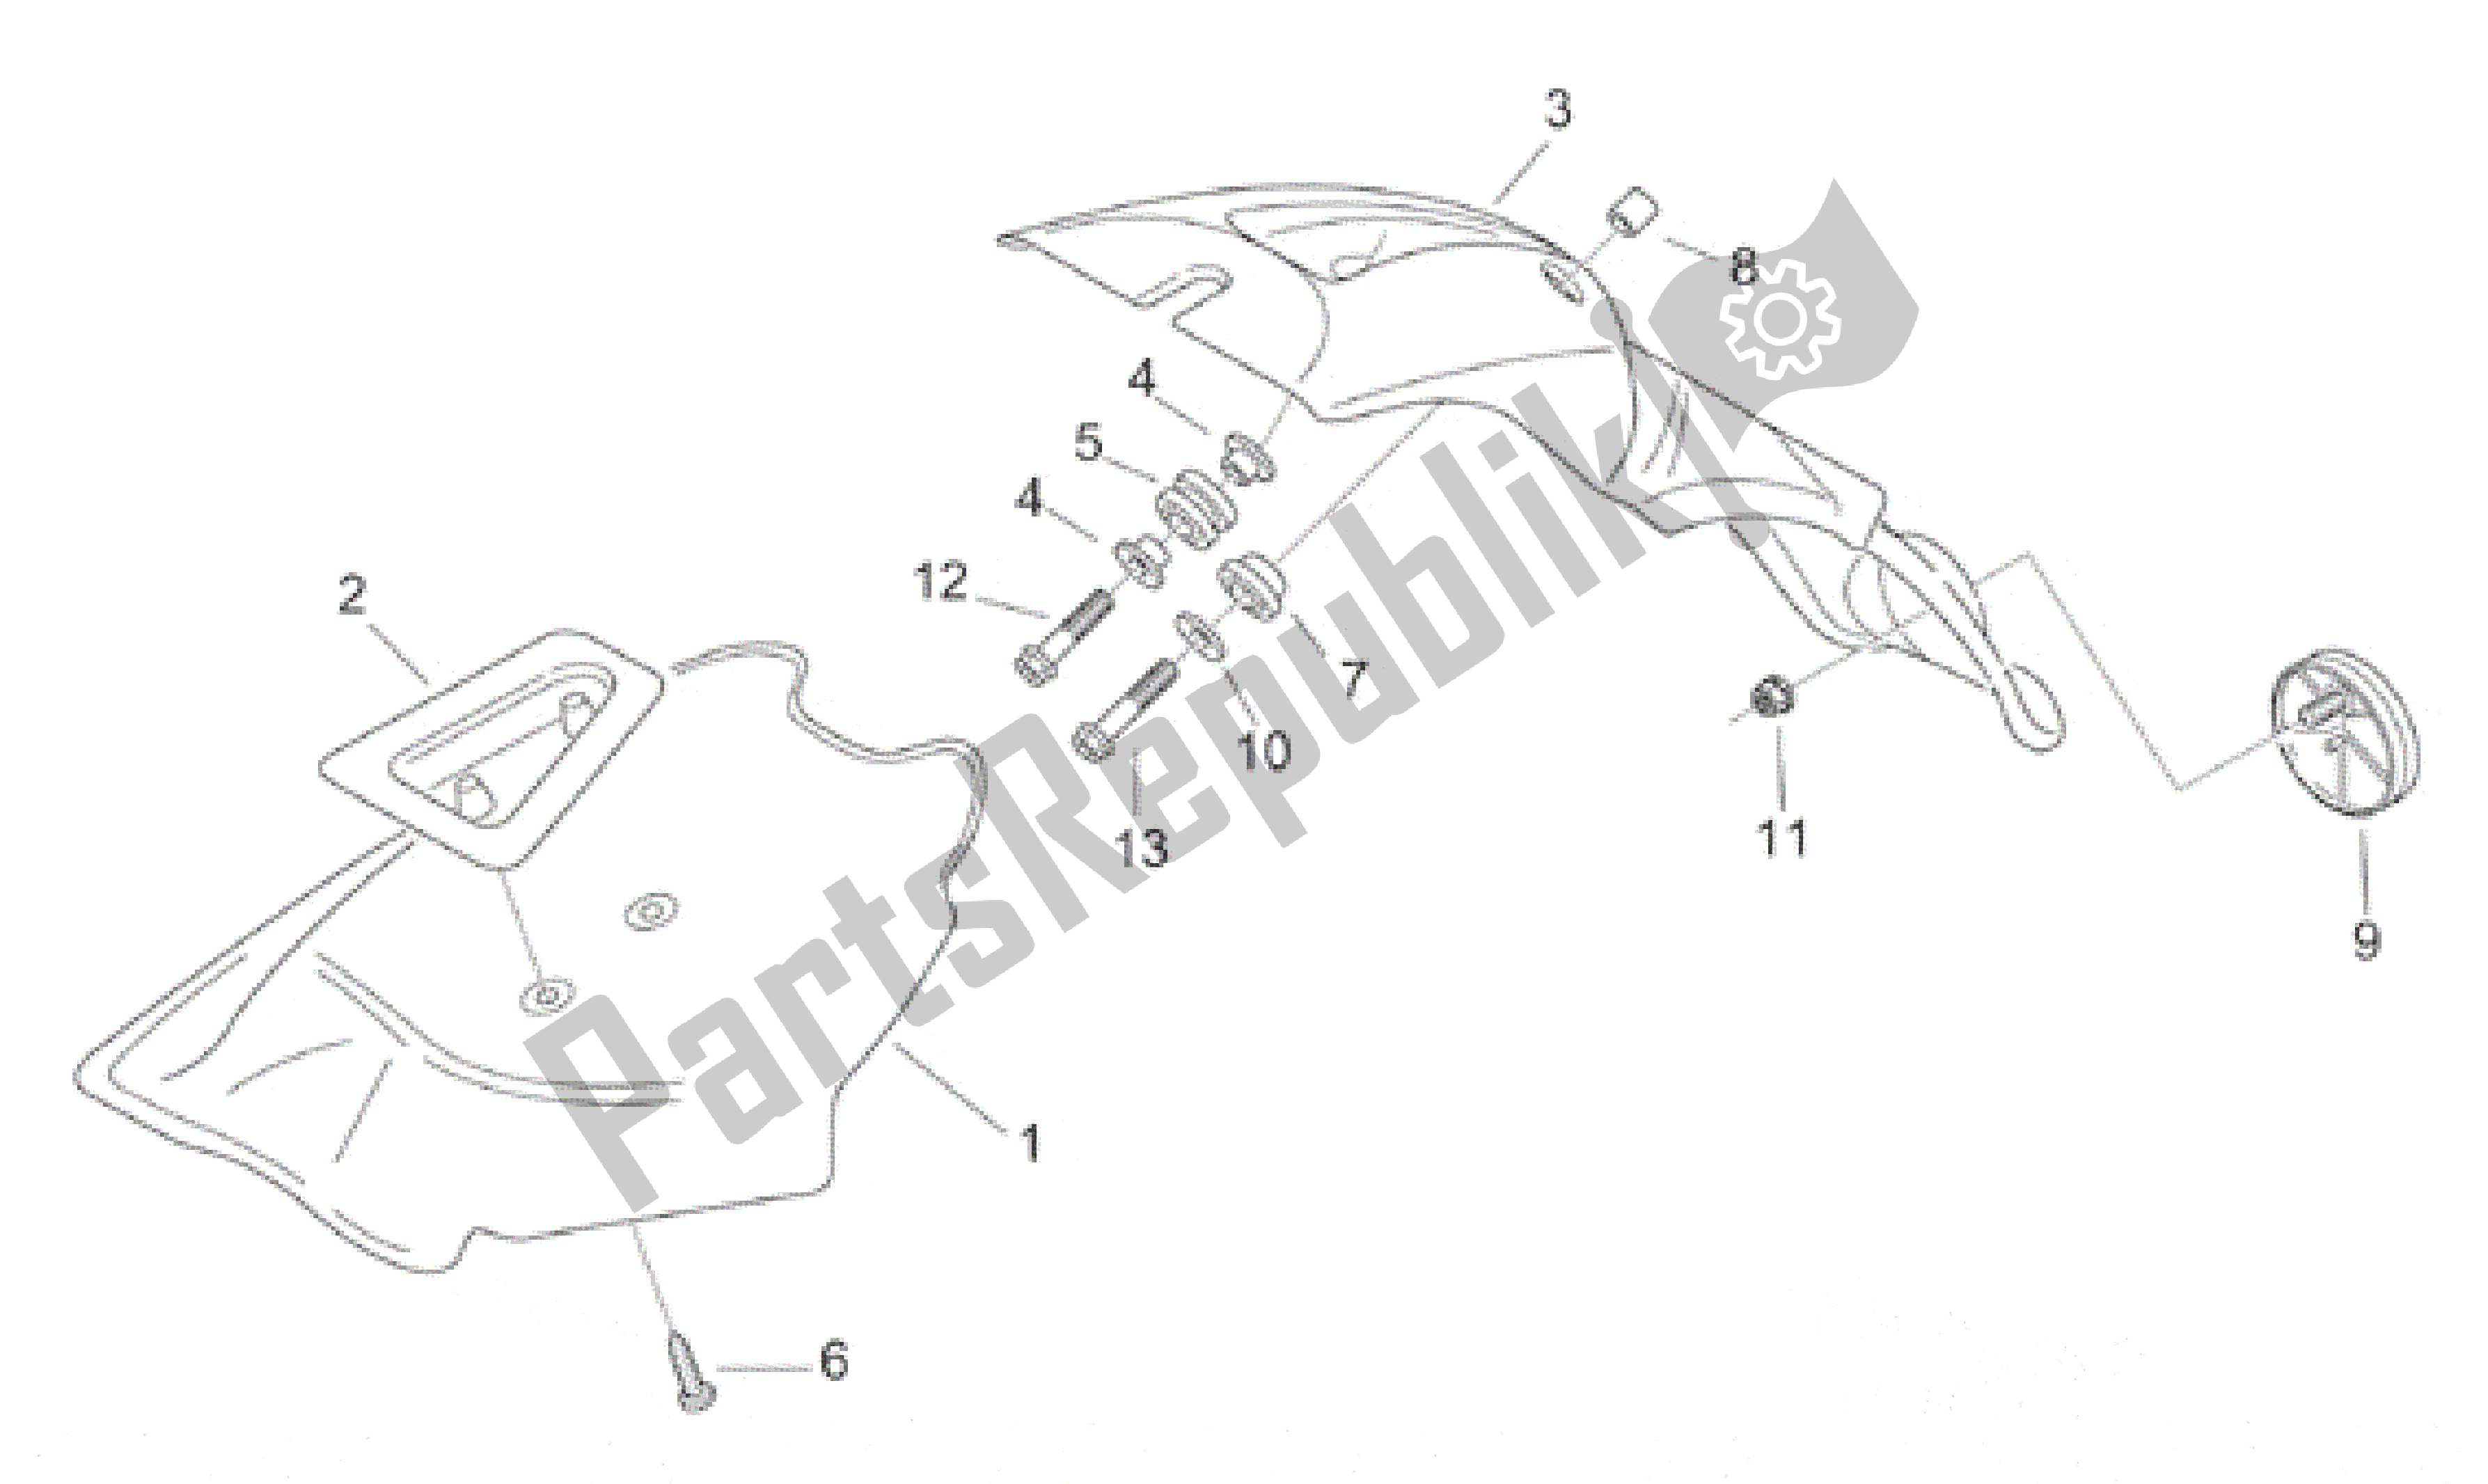 All parts for the Rear Body Iii - Mudguard of the Aprilia Scarabeo 100 2000